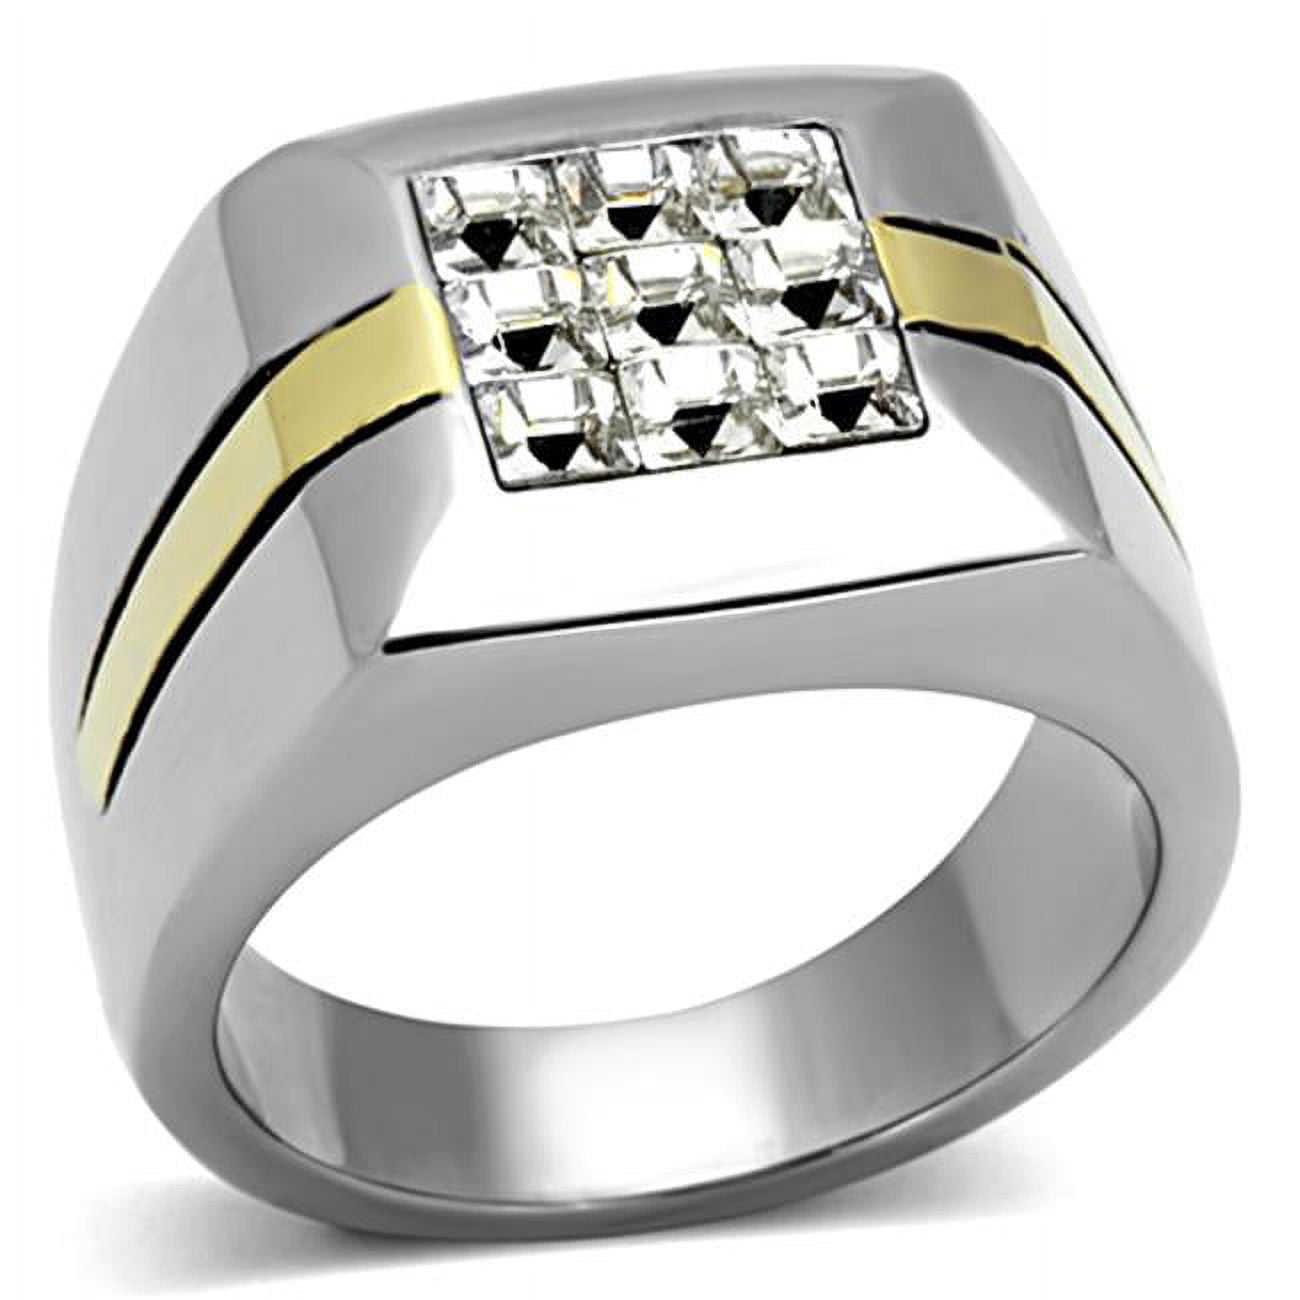 Picture of Alamode TK1178-10 Men Two-Tone IP Gold Stainless Steel Ring with Top Grade Crystal in Clear - Size 10